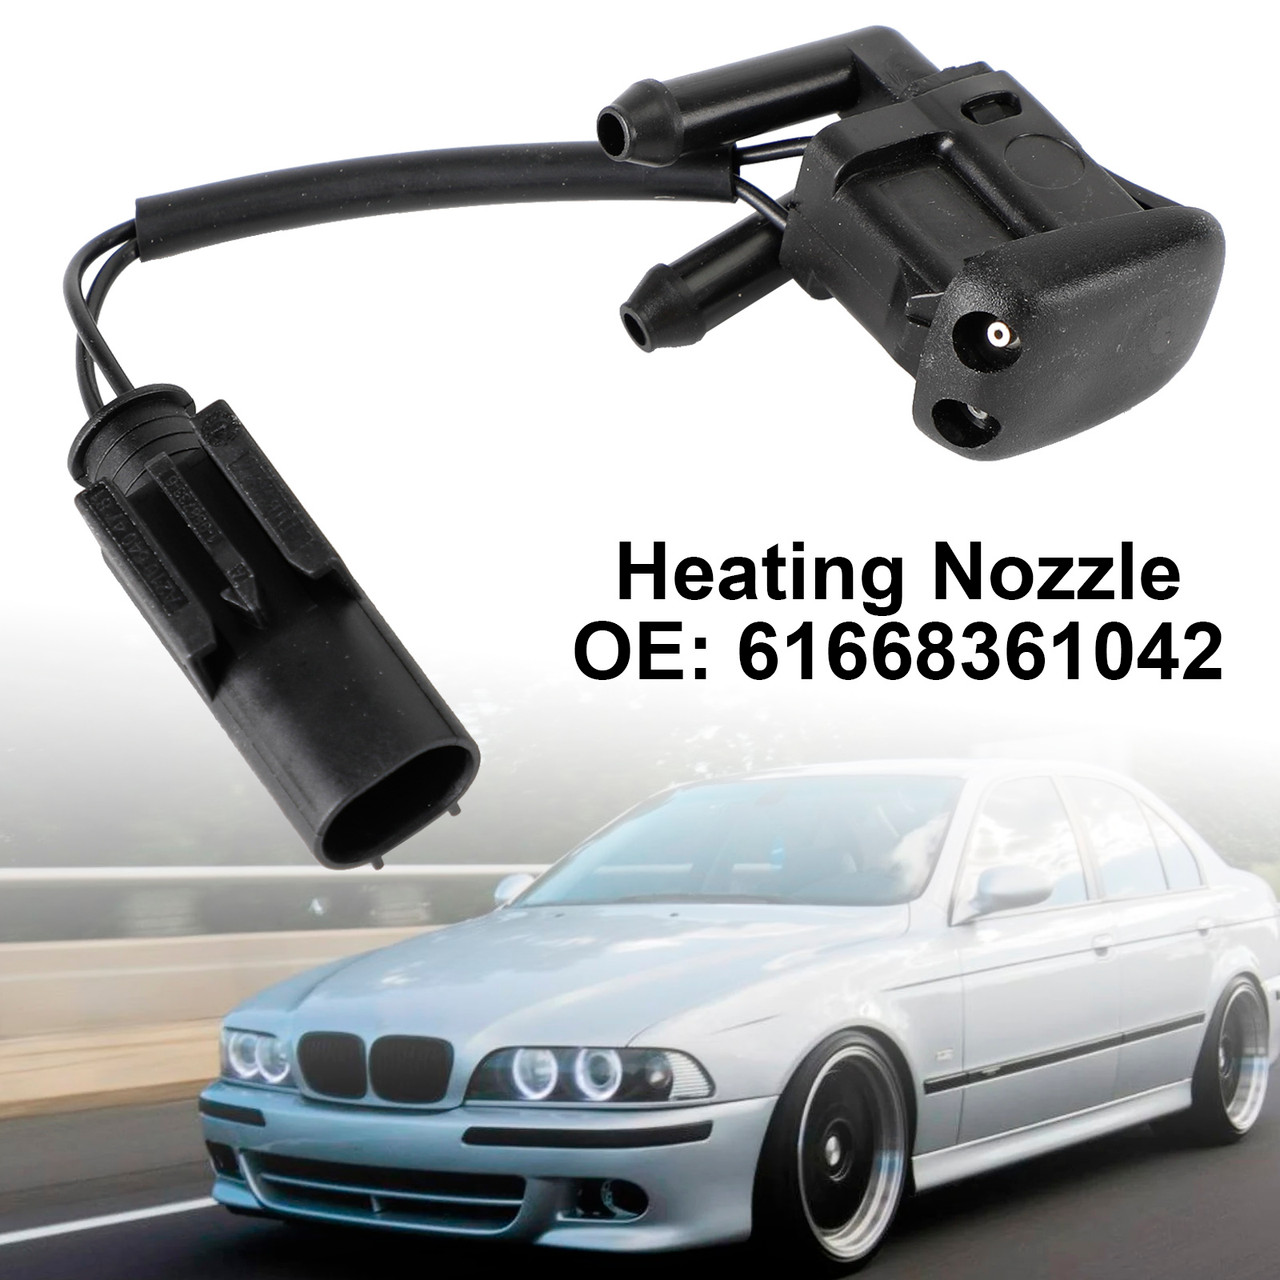 Windshield Wiper Nozzle Spray Jet Heated for BMW 5 Series E39 61668361042